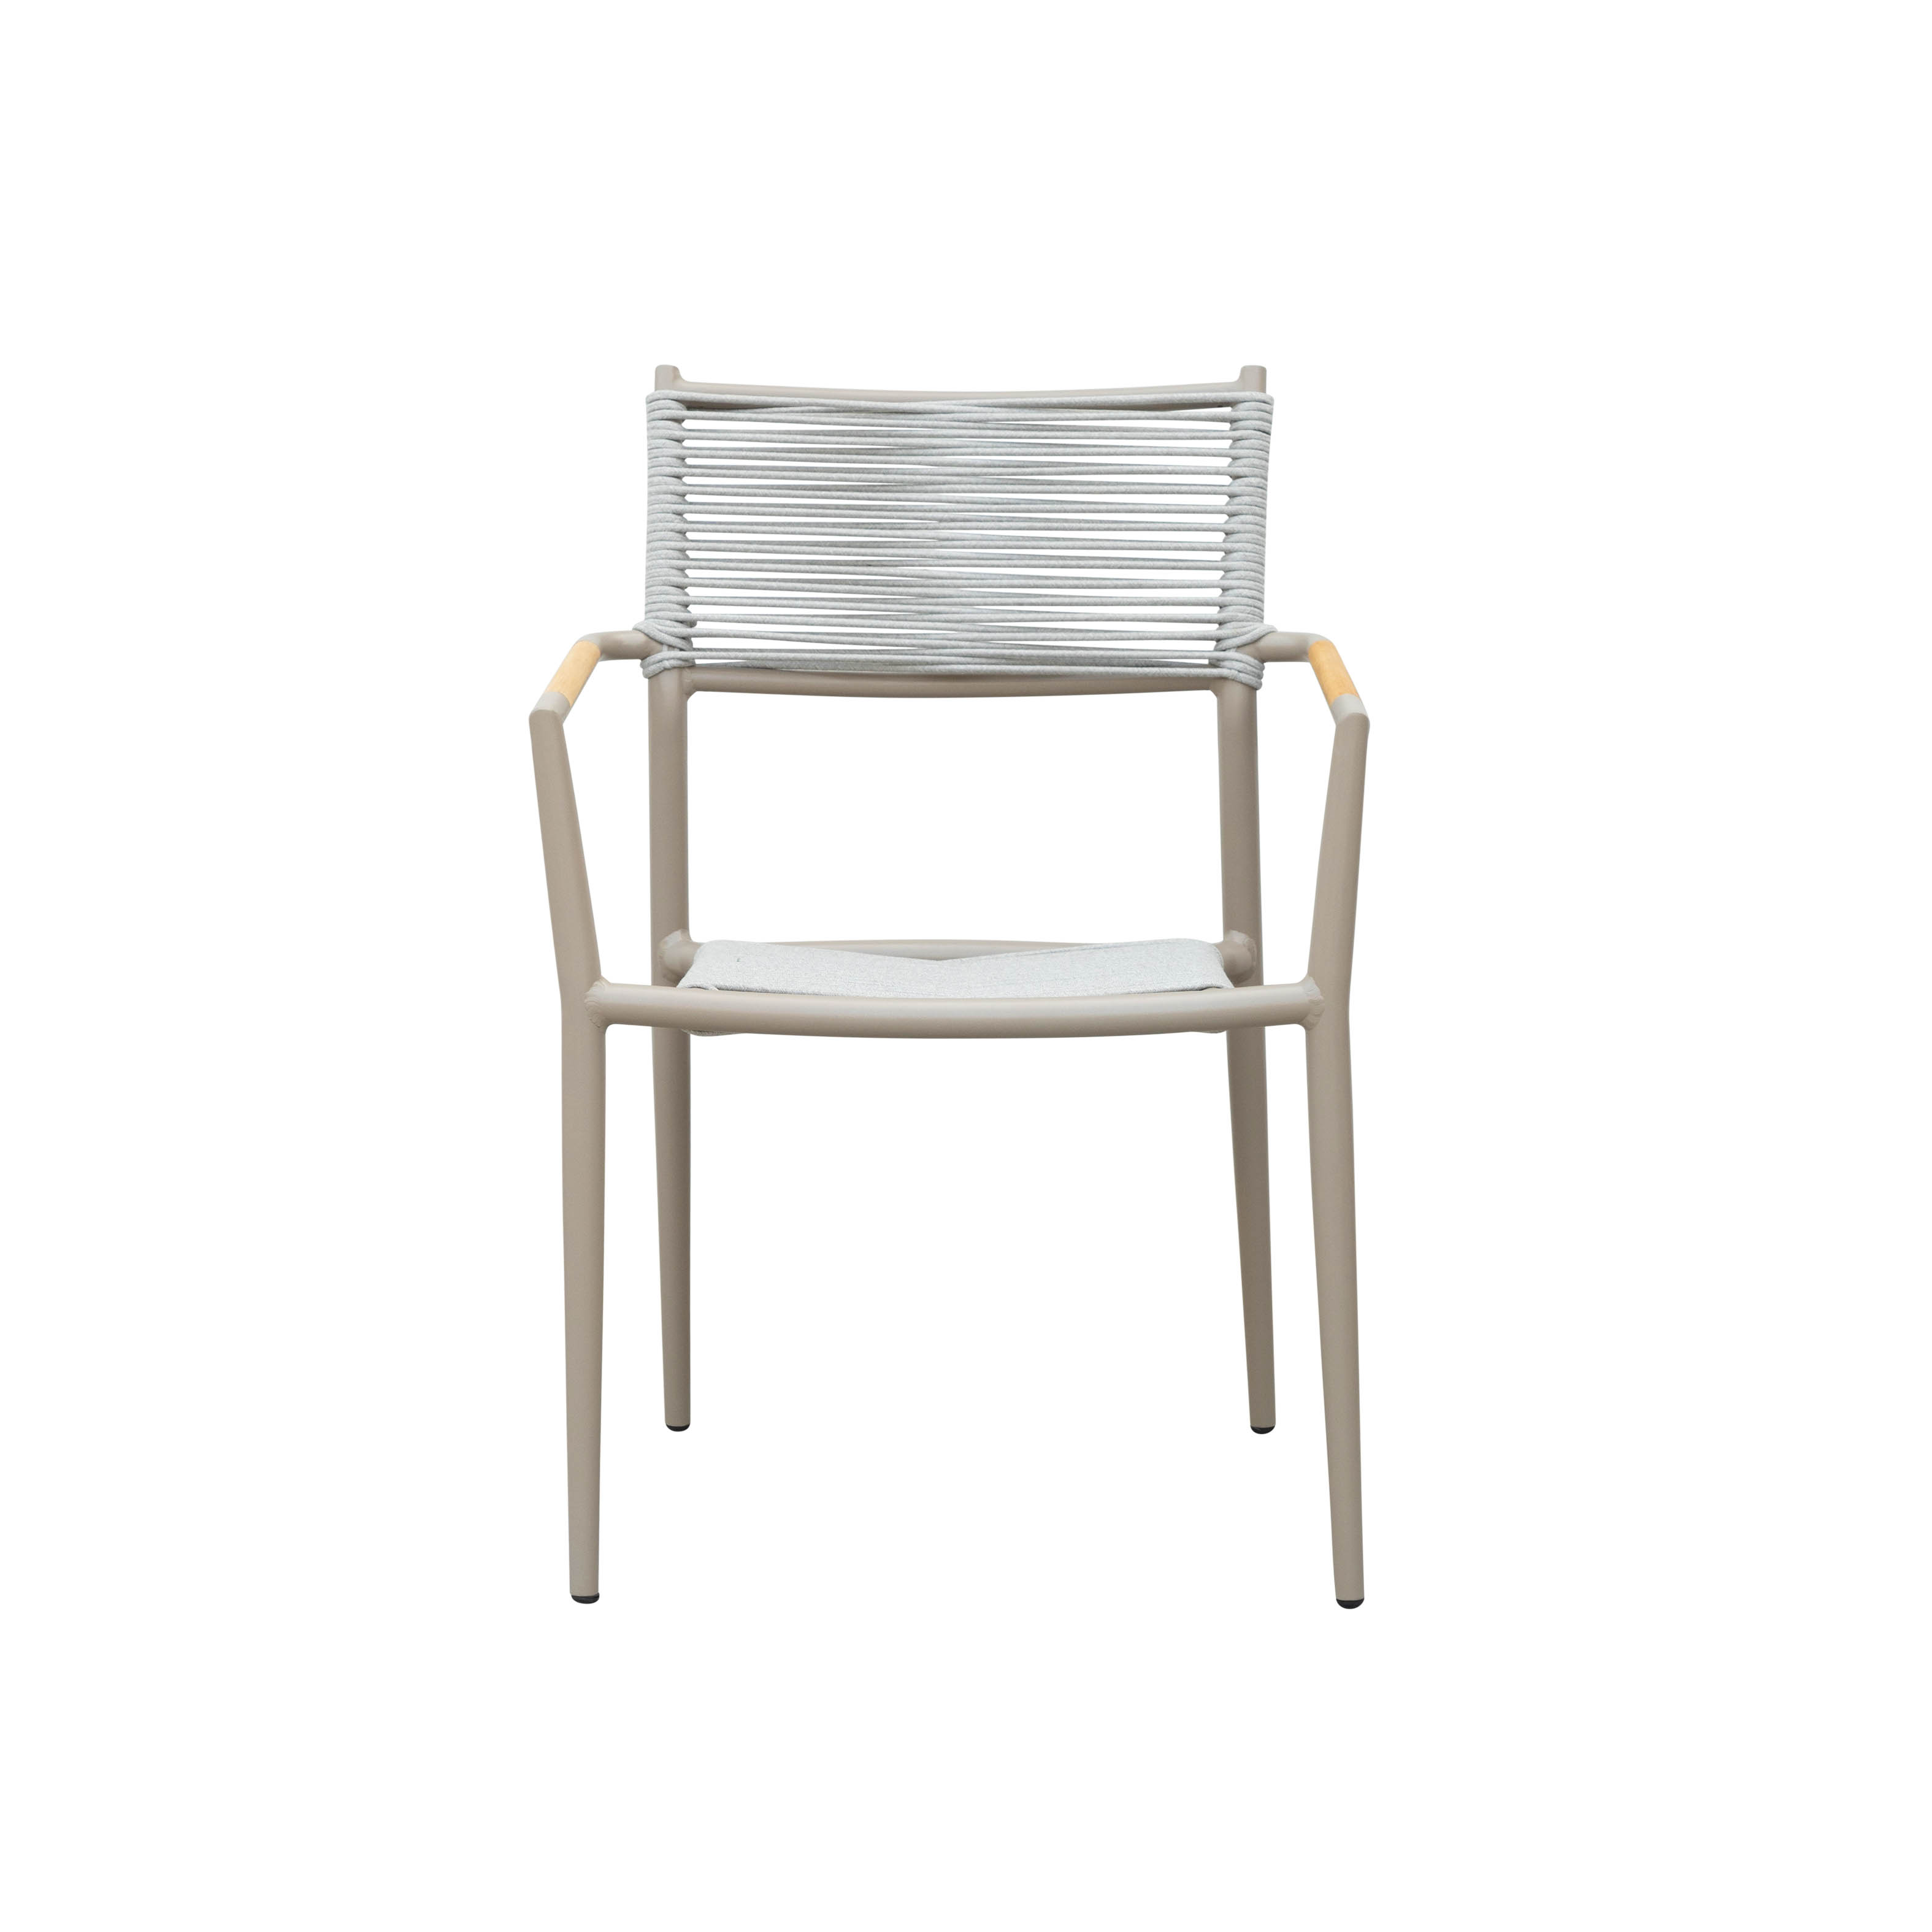 Romeo rope dining chair S4